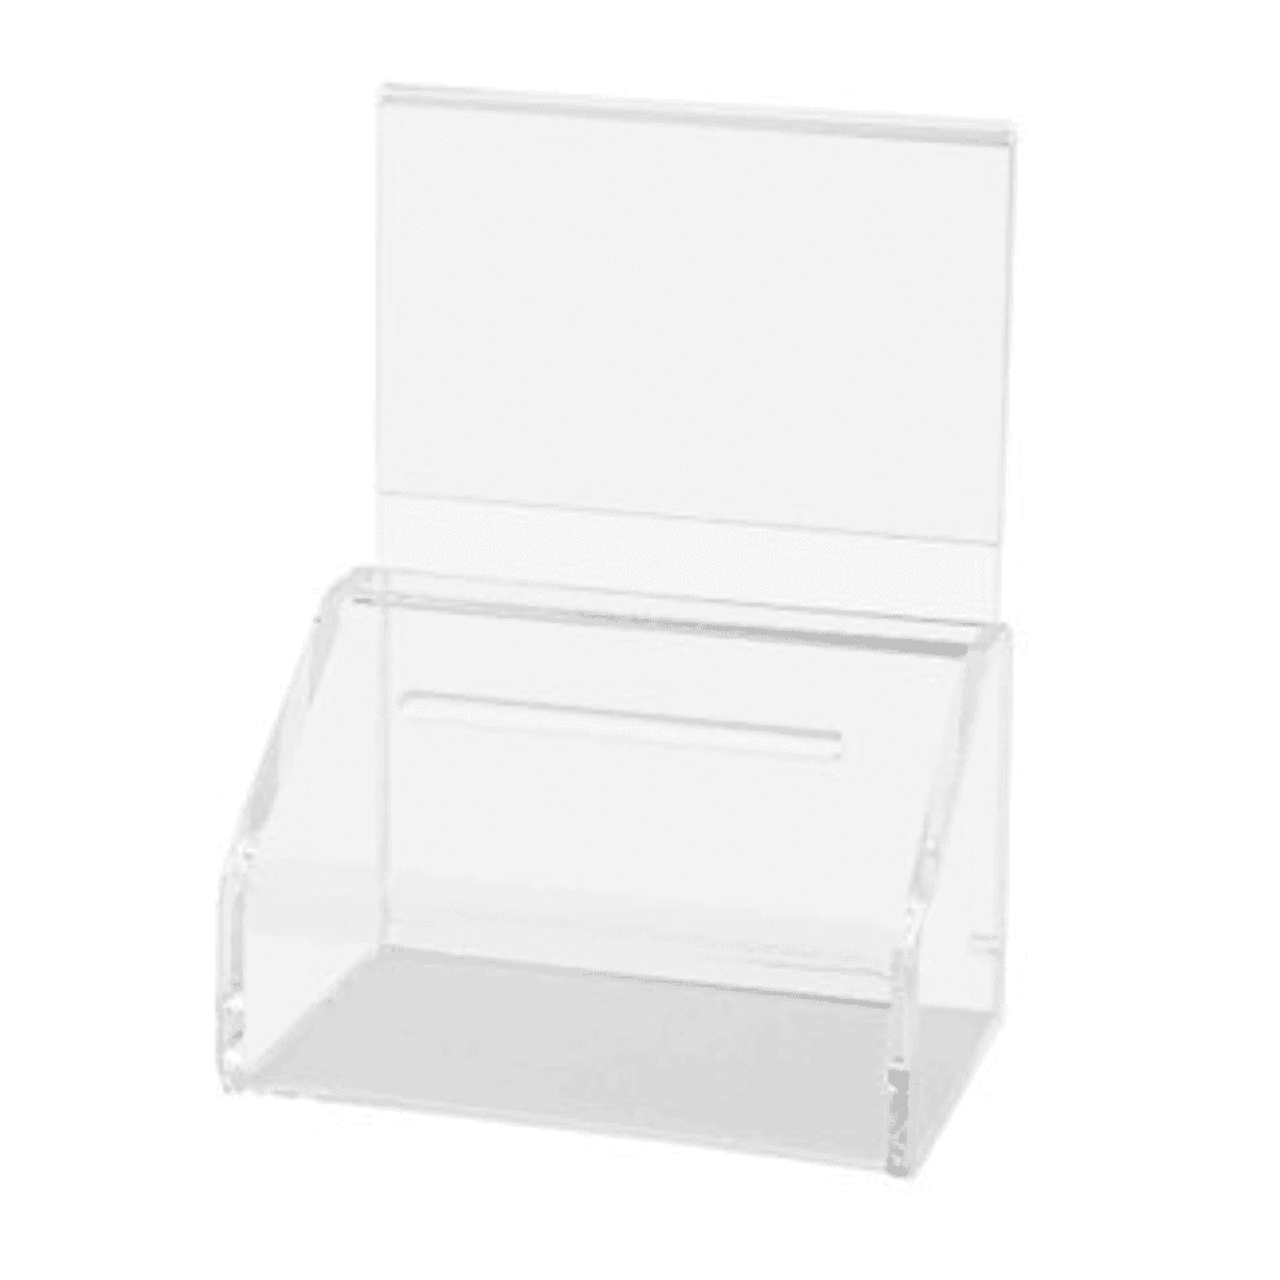 12 inch Cube Ballot Box, Suggestion Box with Key Lock and Side Pocket, Security Pen Included - Clear Acrylic (Bb)